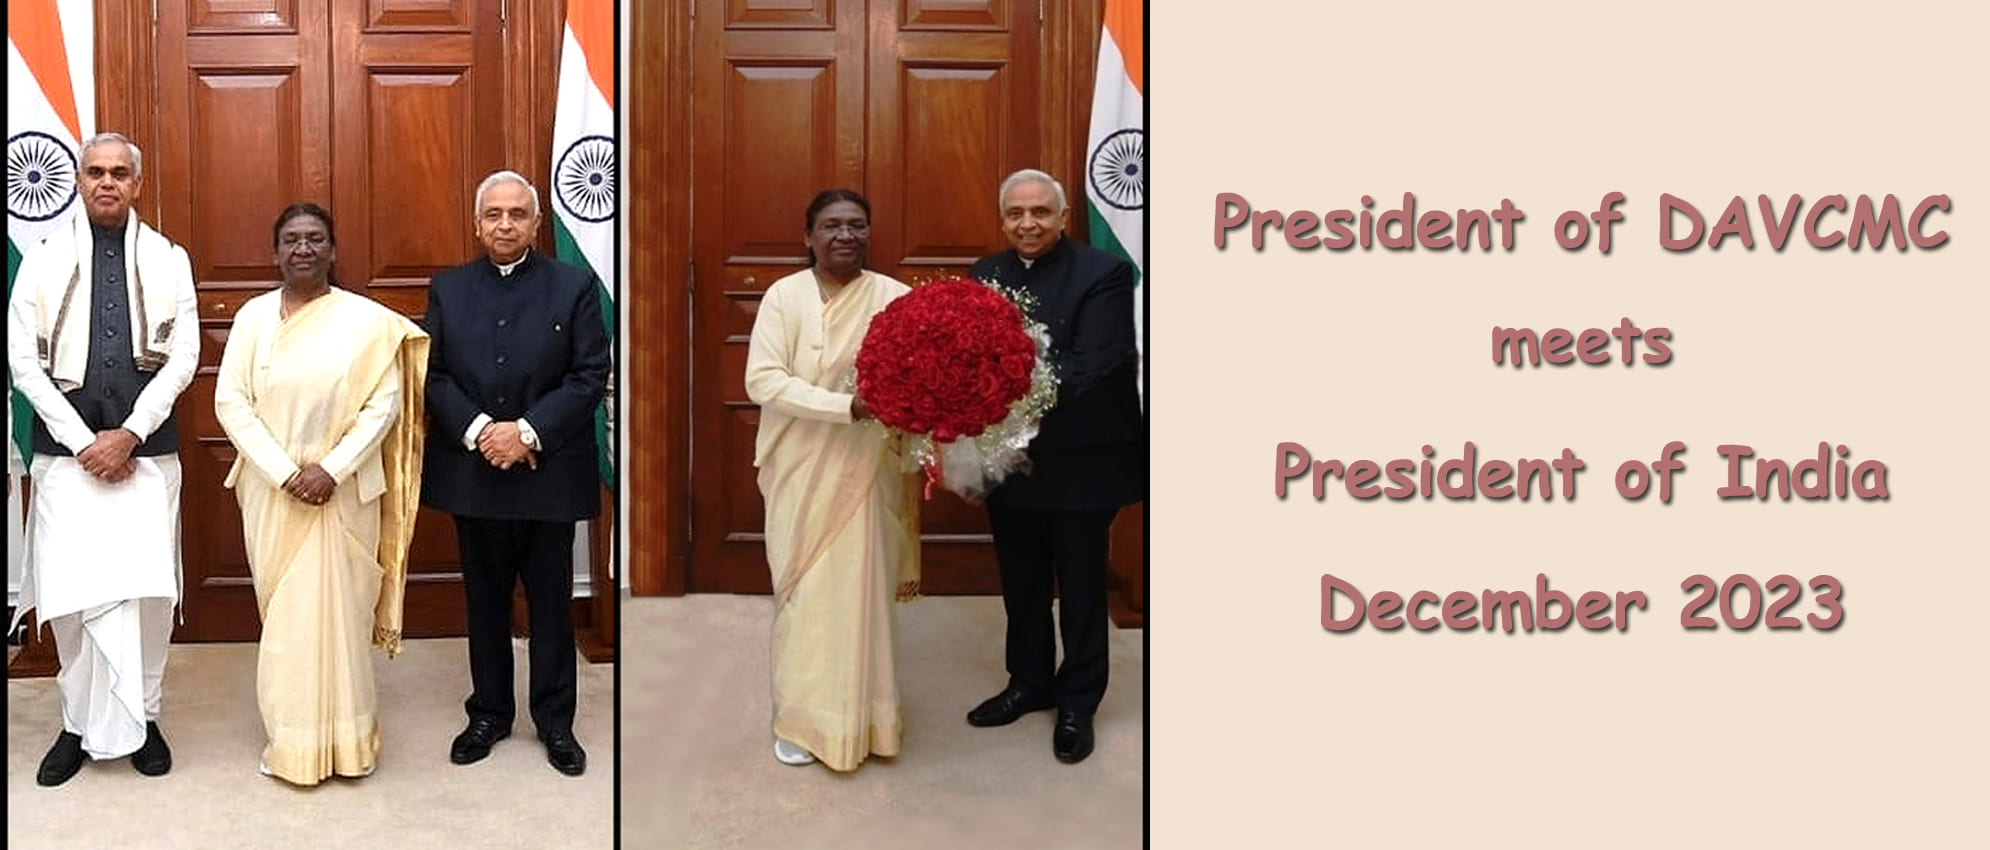 Meeting with President of India